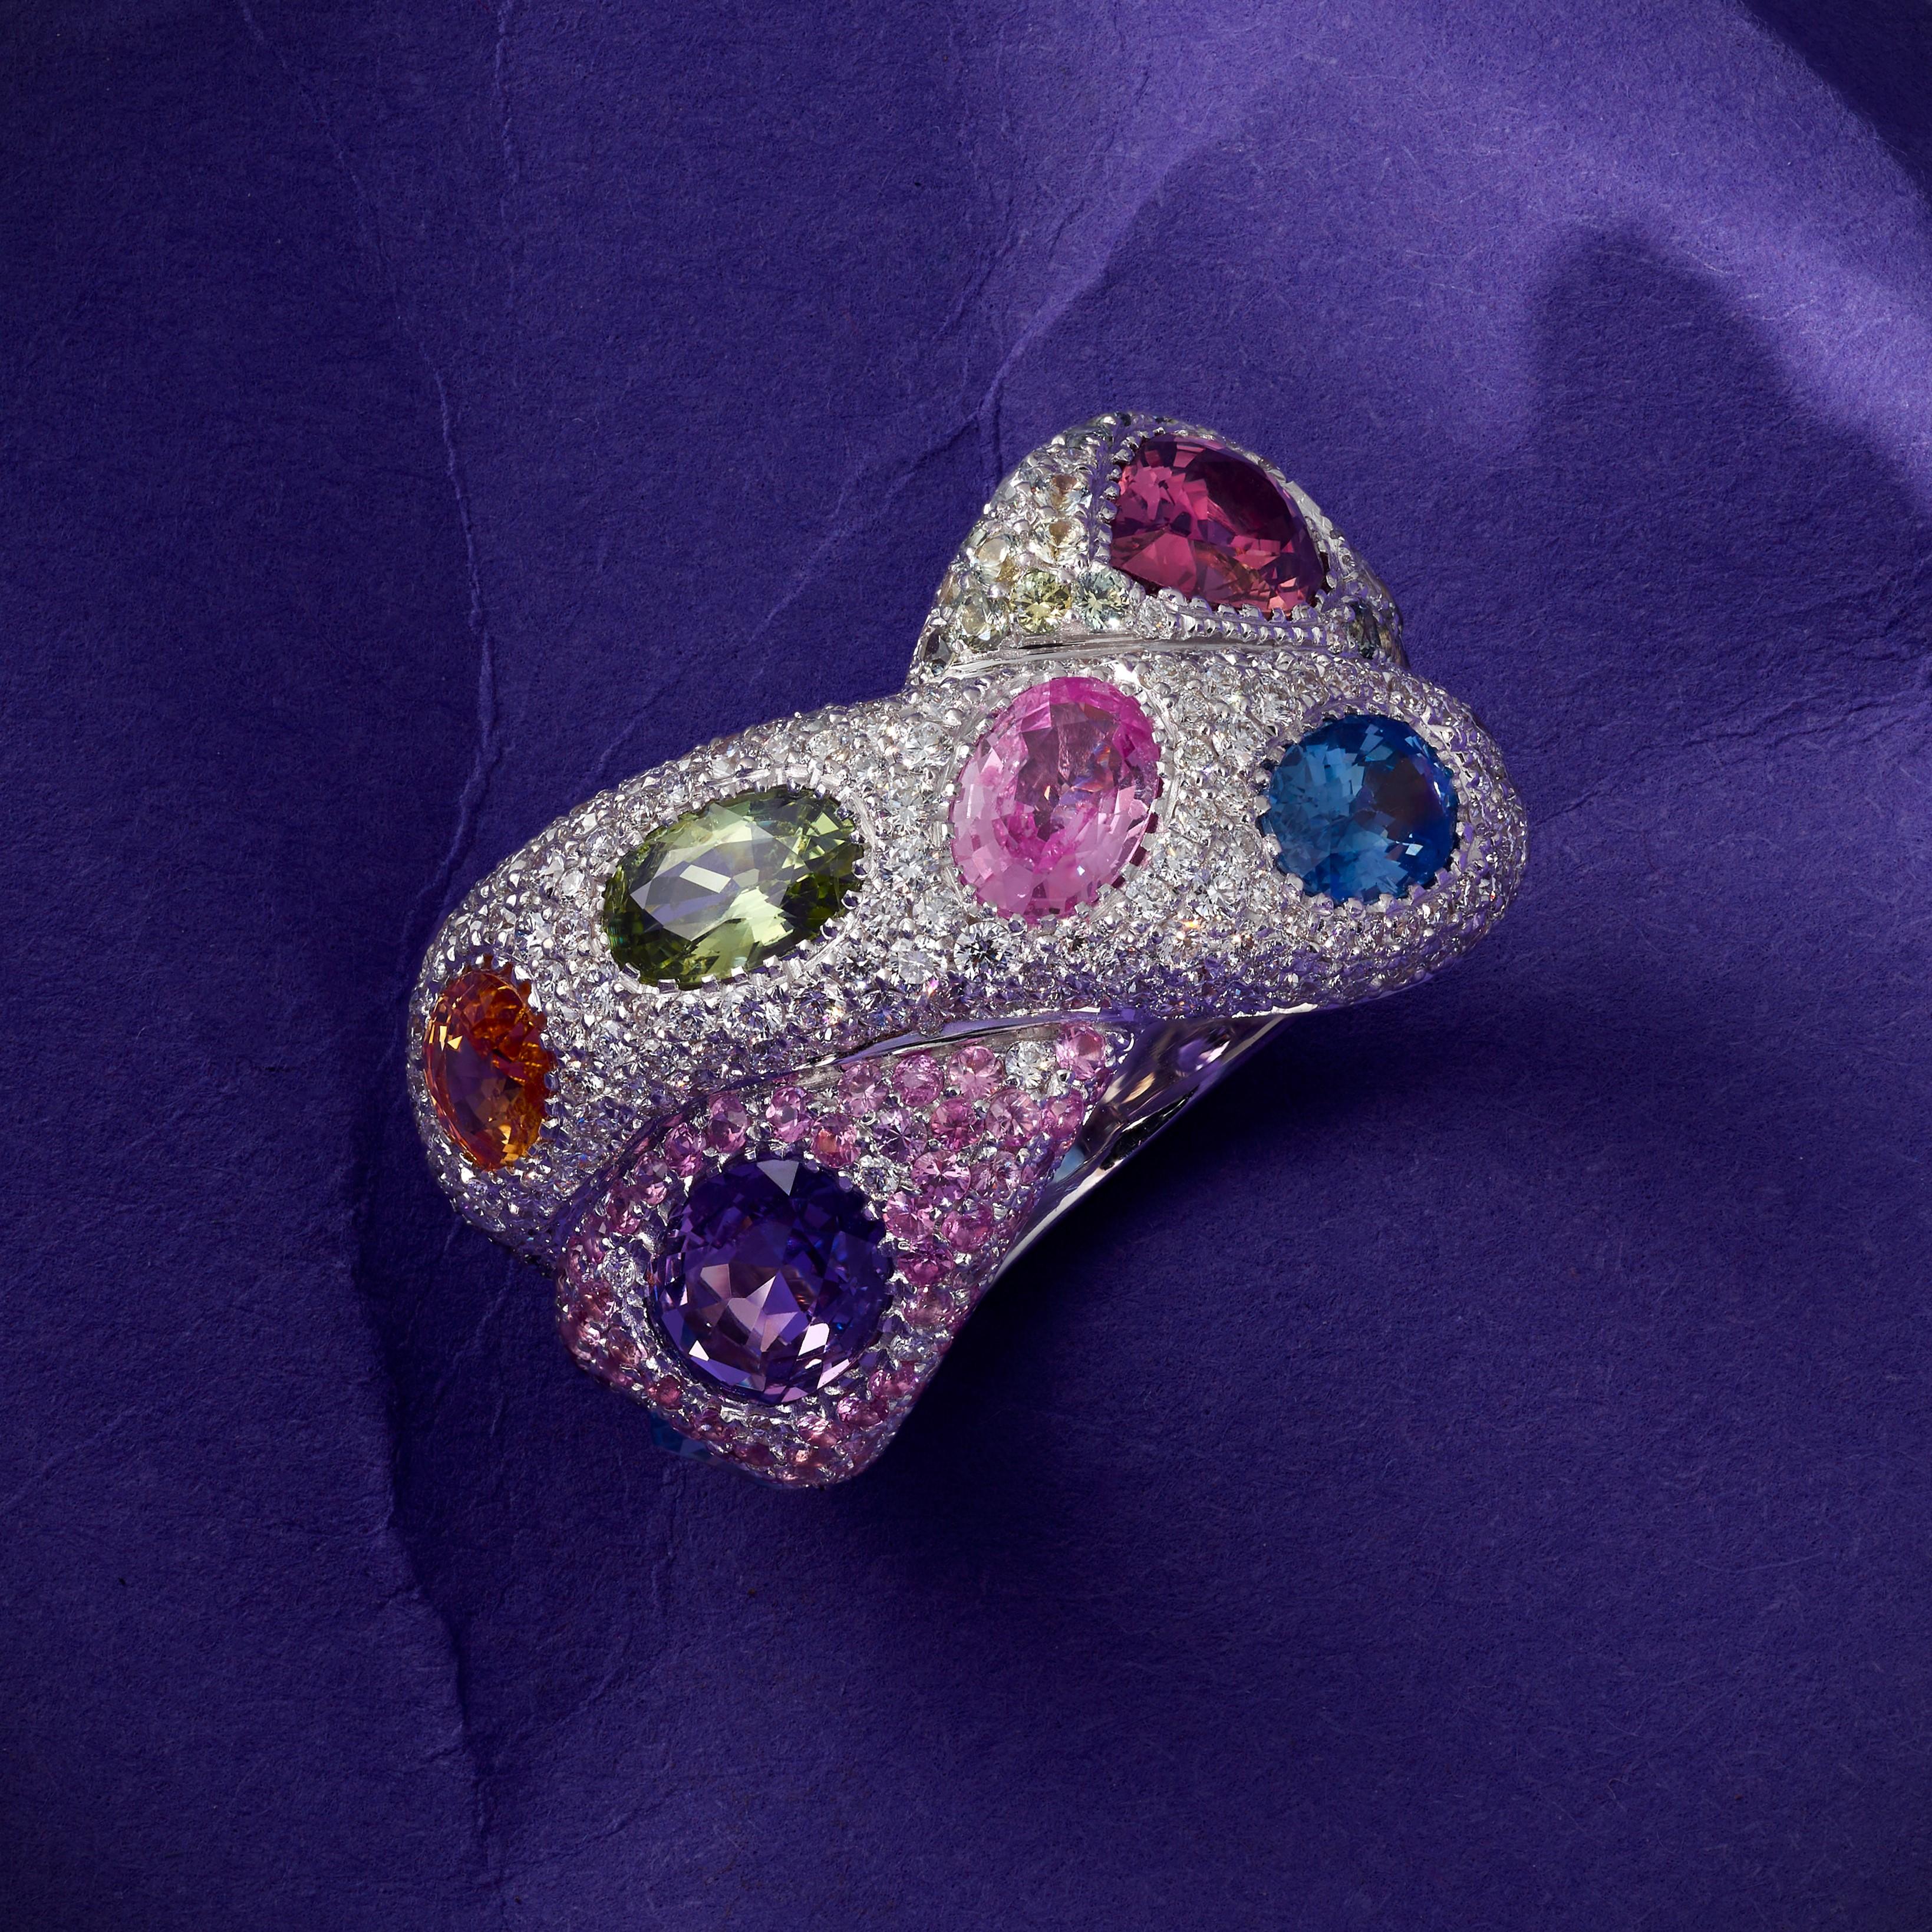 A White Gold cocktail Ring by Rosior Portugal, set with:
- 244 Natural Colorless Diamonds weighing 1,47 ct;
- 48 Green Sapphires weighing 0,60 ct;
- 80 Pink Sapphires weighing 0,66 ct;
- 2 Oval Cut Purple Sapphires weighing 1,45 ct;
- 1 Oval Cut